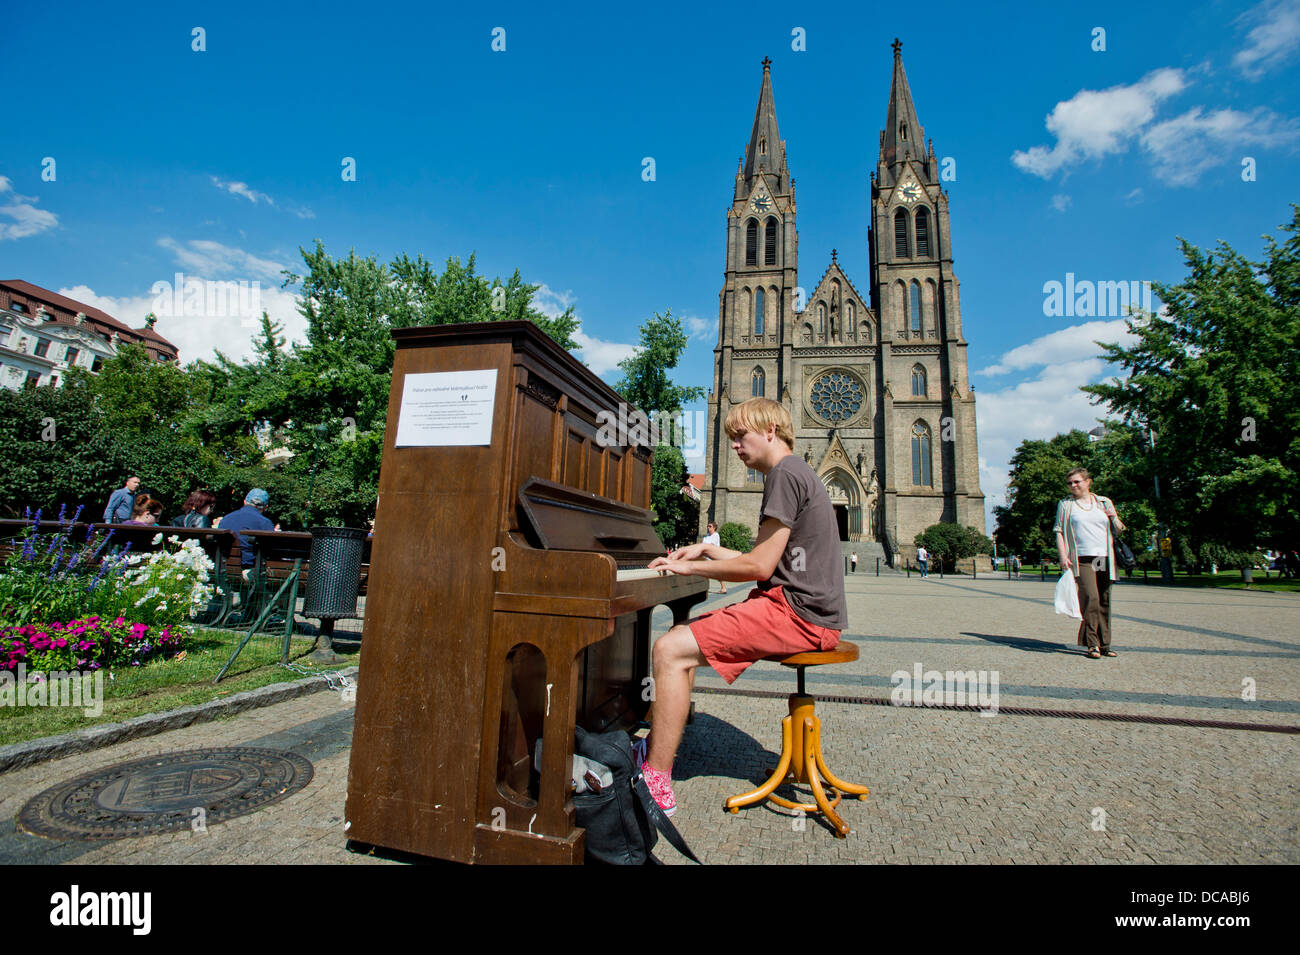 Prague, Czech Republic. 13th August 2013. People play public accessed piano at Prague's Namesti Miru Square, Czech Republic as coffee owner Ondrej Kobza placed pianos on several places in Prague where people can play these music instruments freely. Kobza wants to make the public area more cosy. (CTK Photo/Vit Simanek/Alamy Live News) Stock Photo